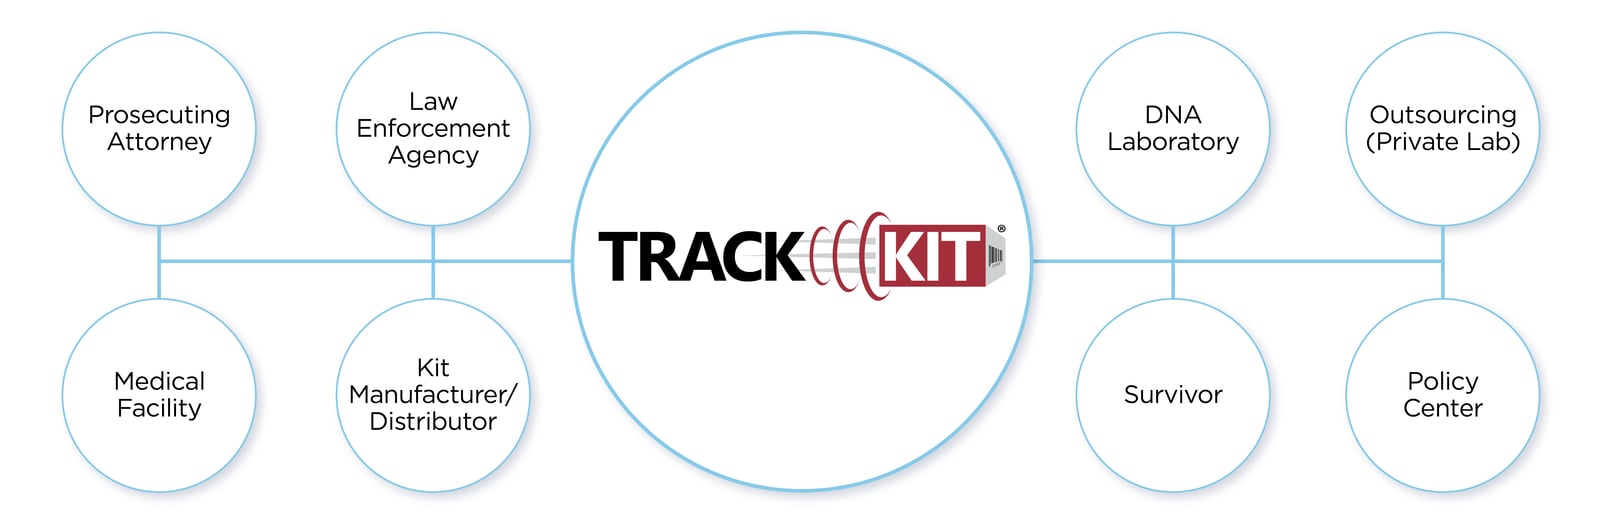 Track-Kit: The only SAK tracking solution that delivers accountability, transparency, and information-sharing among all stakeholders